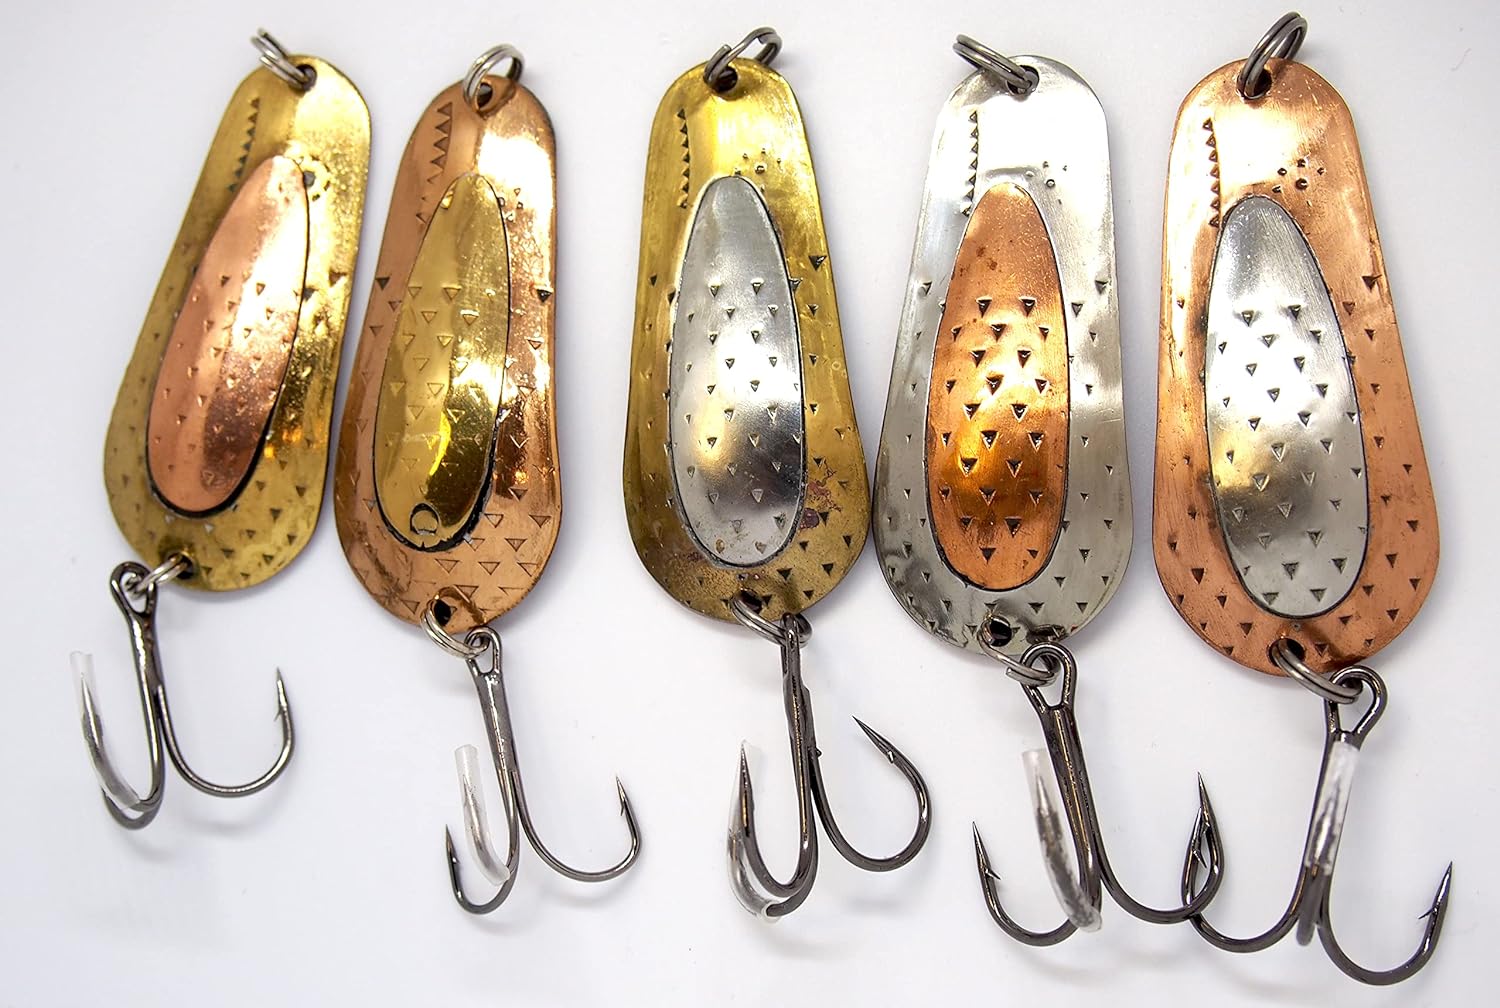 Handmade Fishing Spoon Lure Set, Unique Brass Copper Fishing Tackles for Pike and bass Fishing in a Gift Box